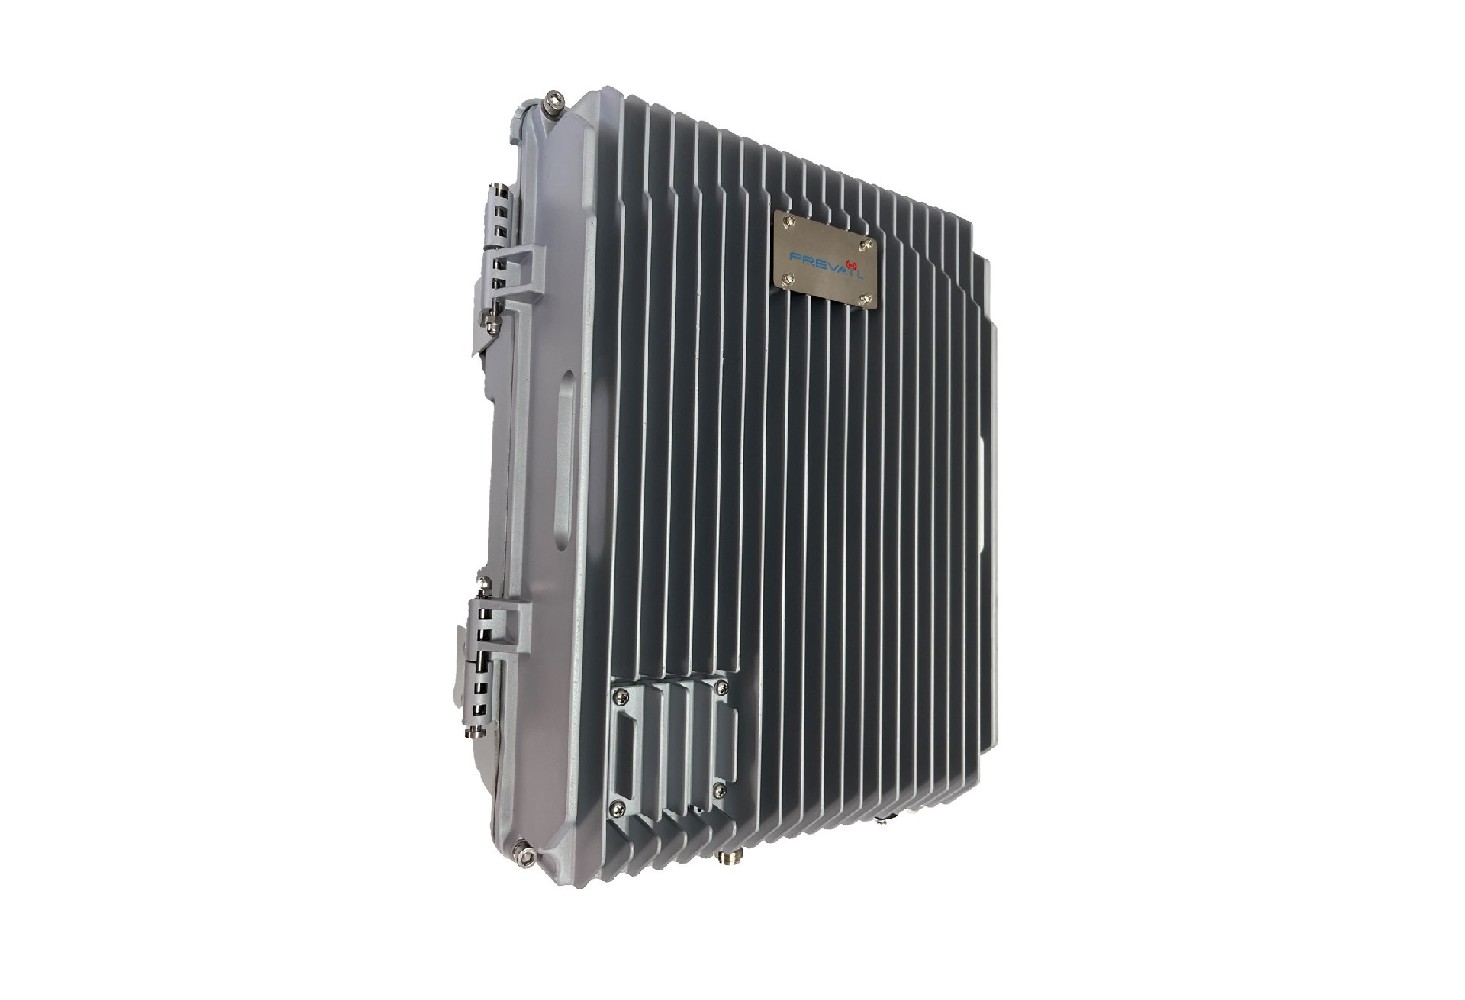 4G LTE High Power ICS Repeater